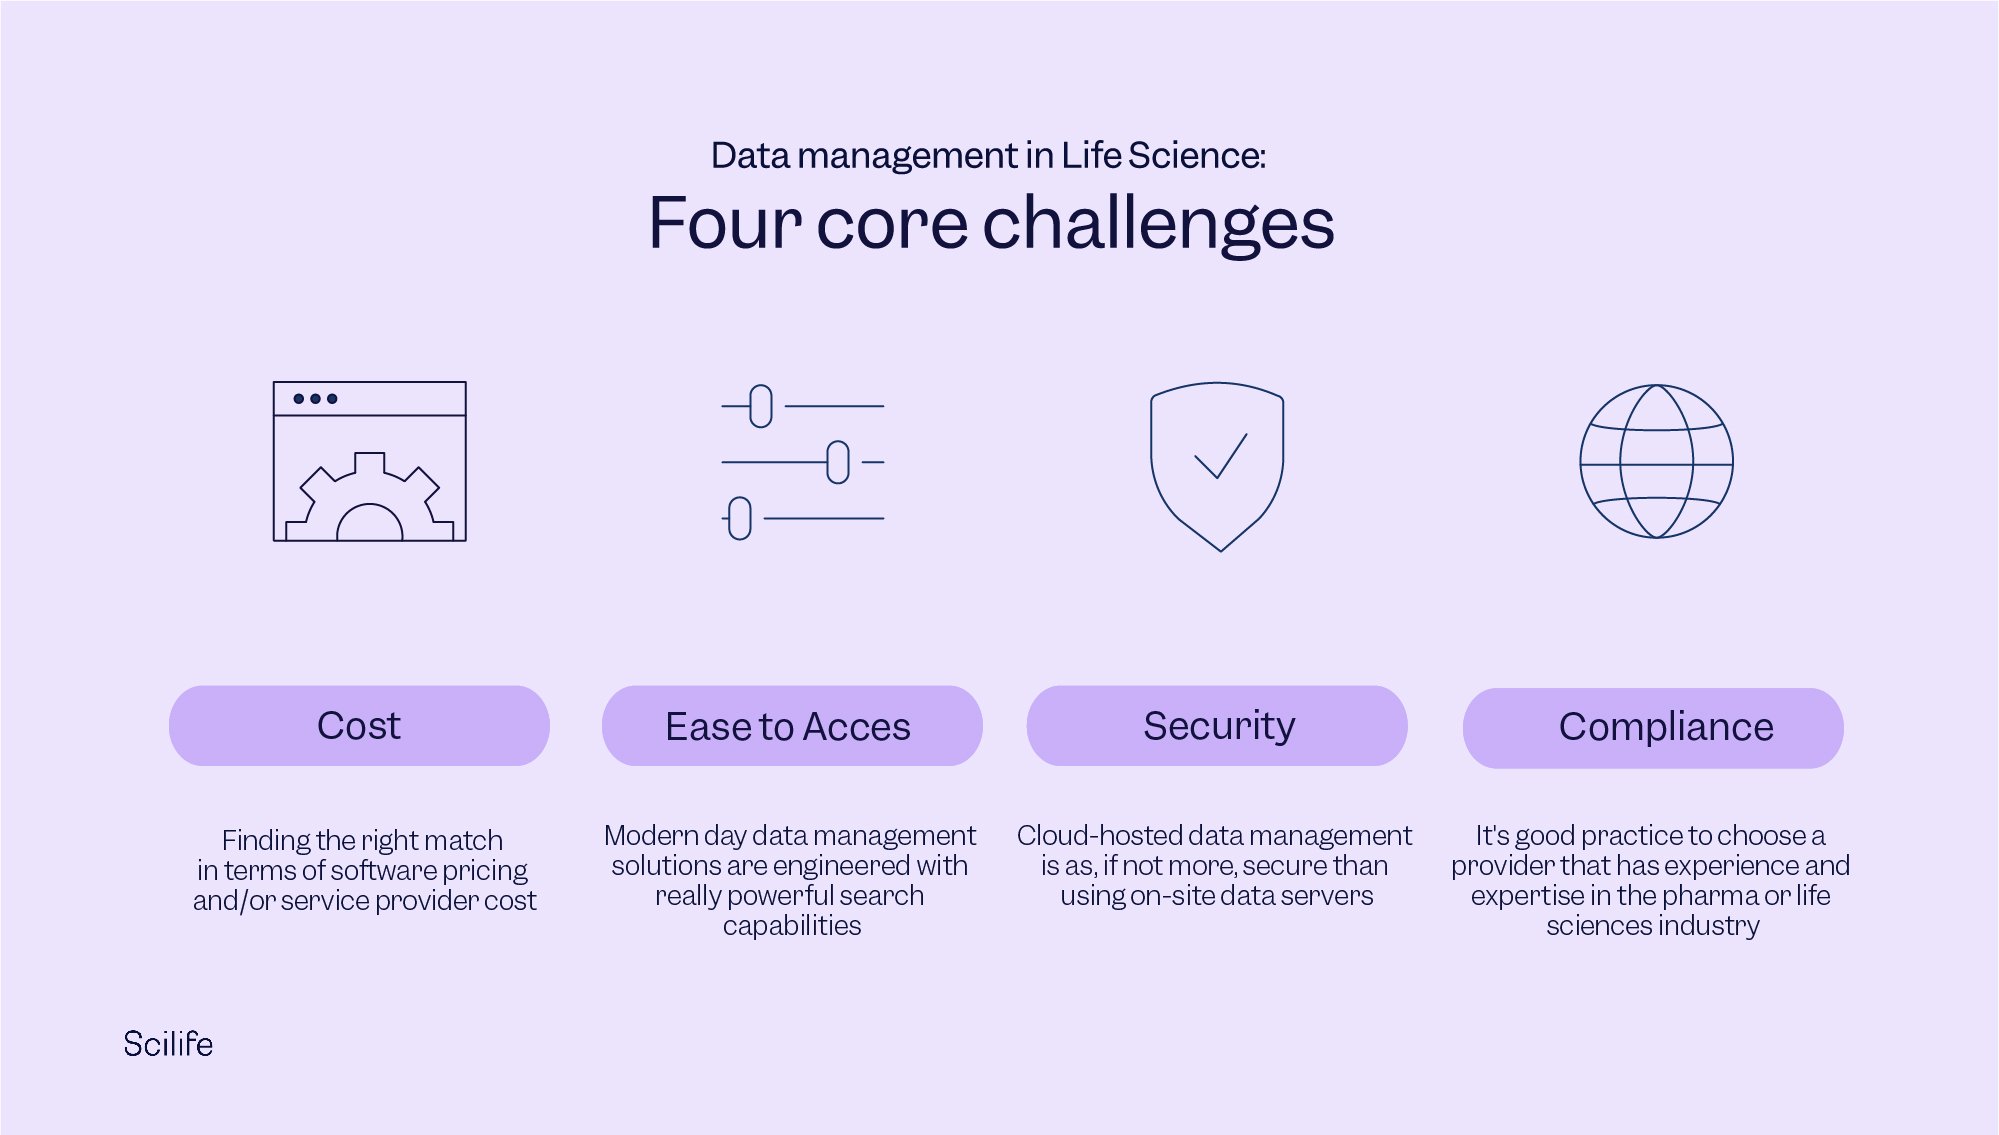 Illustrator with the four core challenges of Data management in Life Sciences by Scilife.